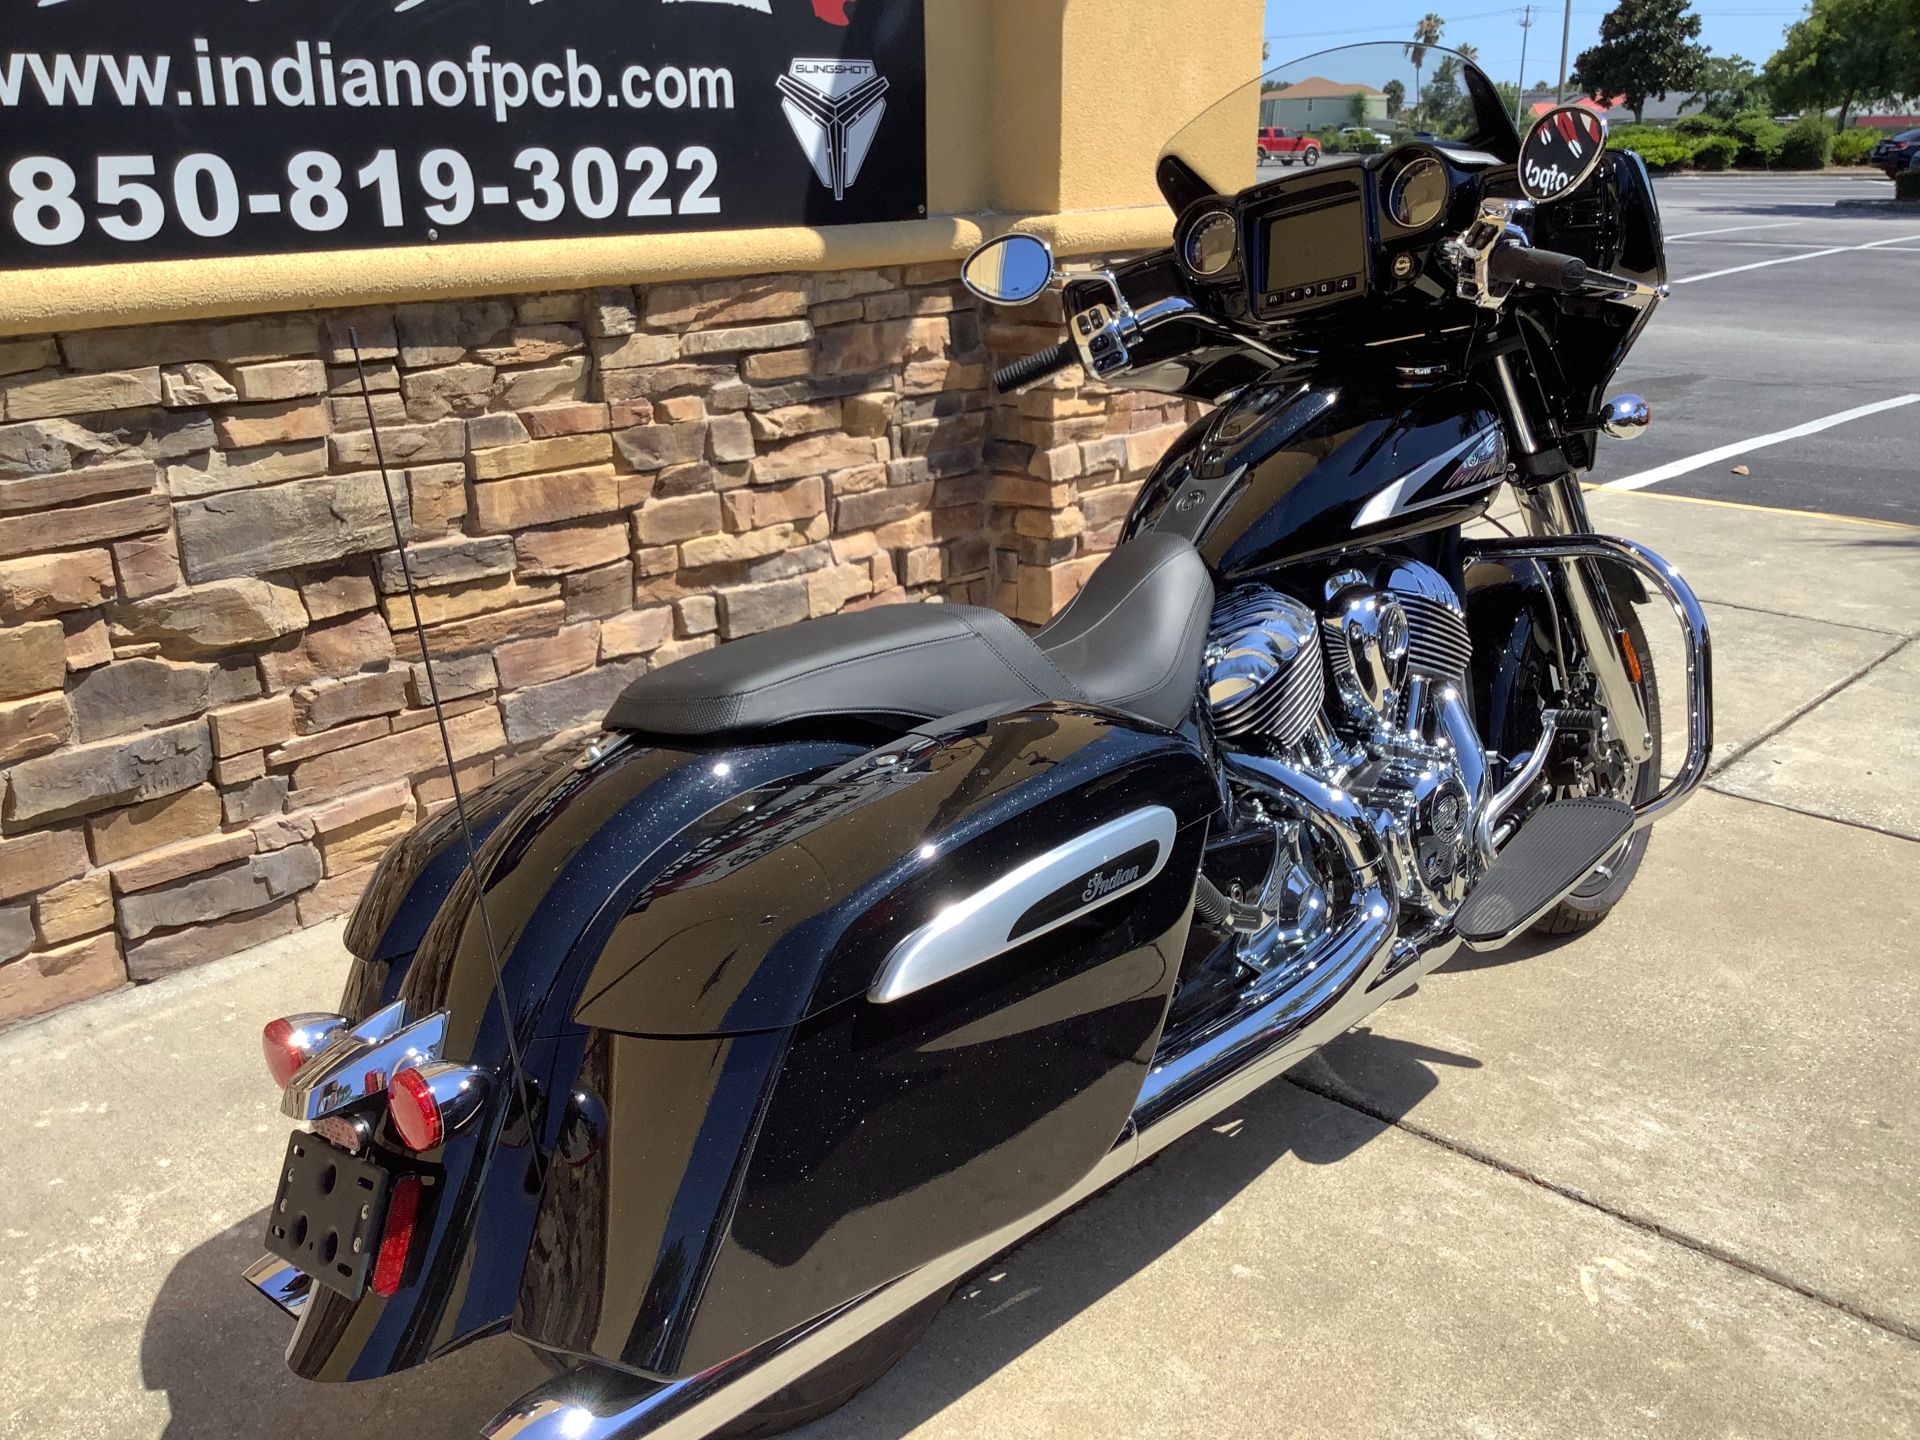 2021 Indian Motorcycle CHIEFTAIN LIMITED in Panama City Beach, Florida - Photo 6